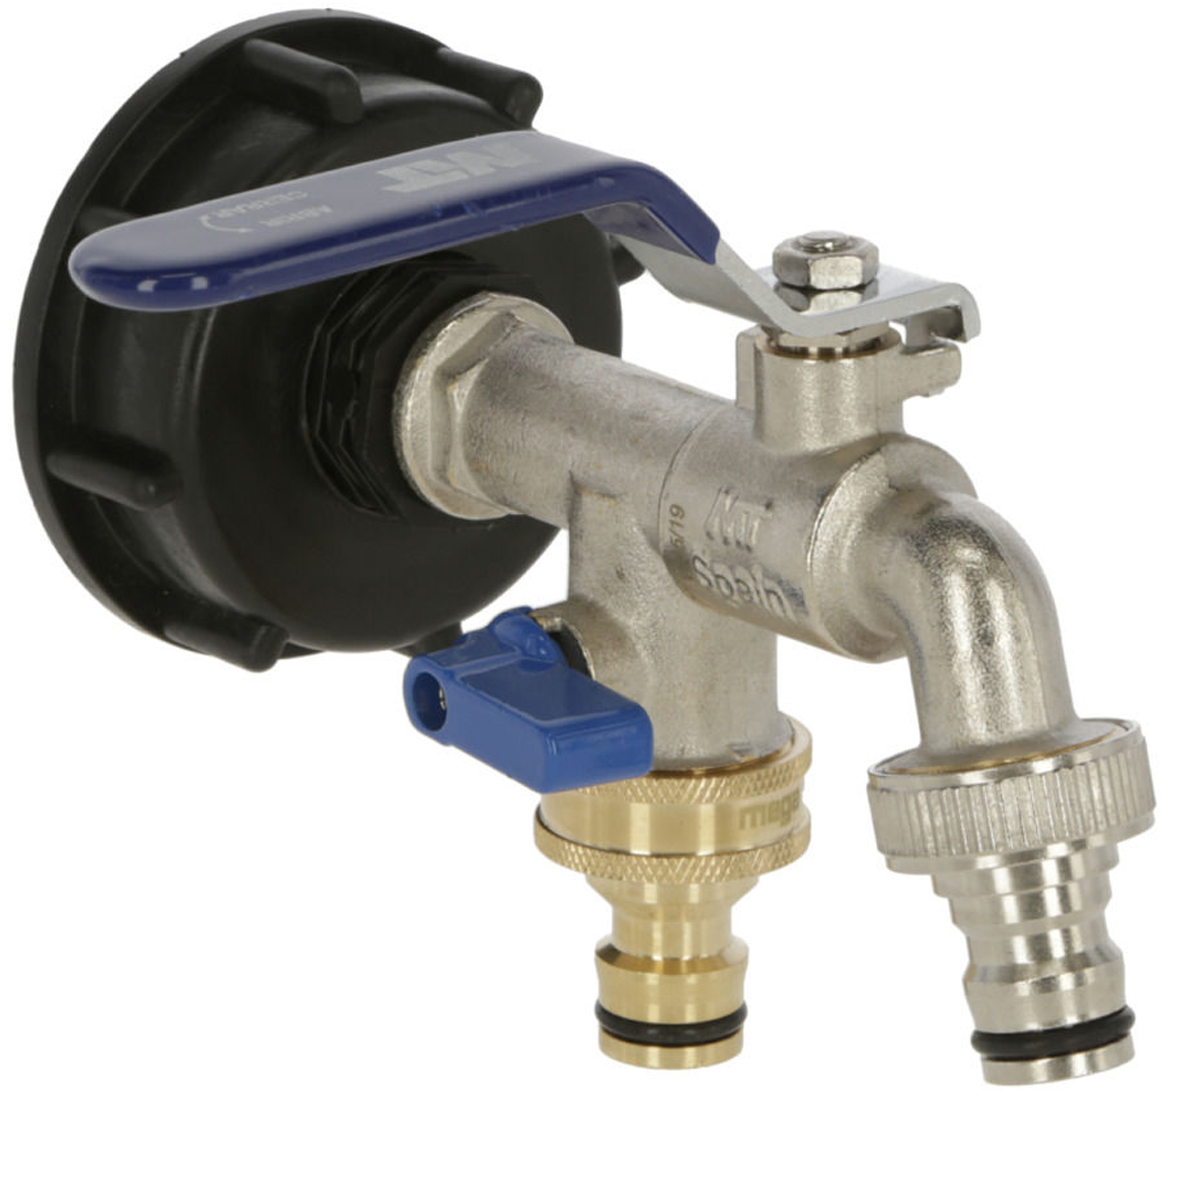 Connection tap for IBC containers with two quick couplings